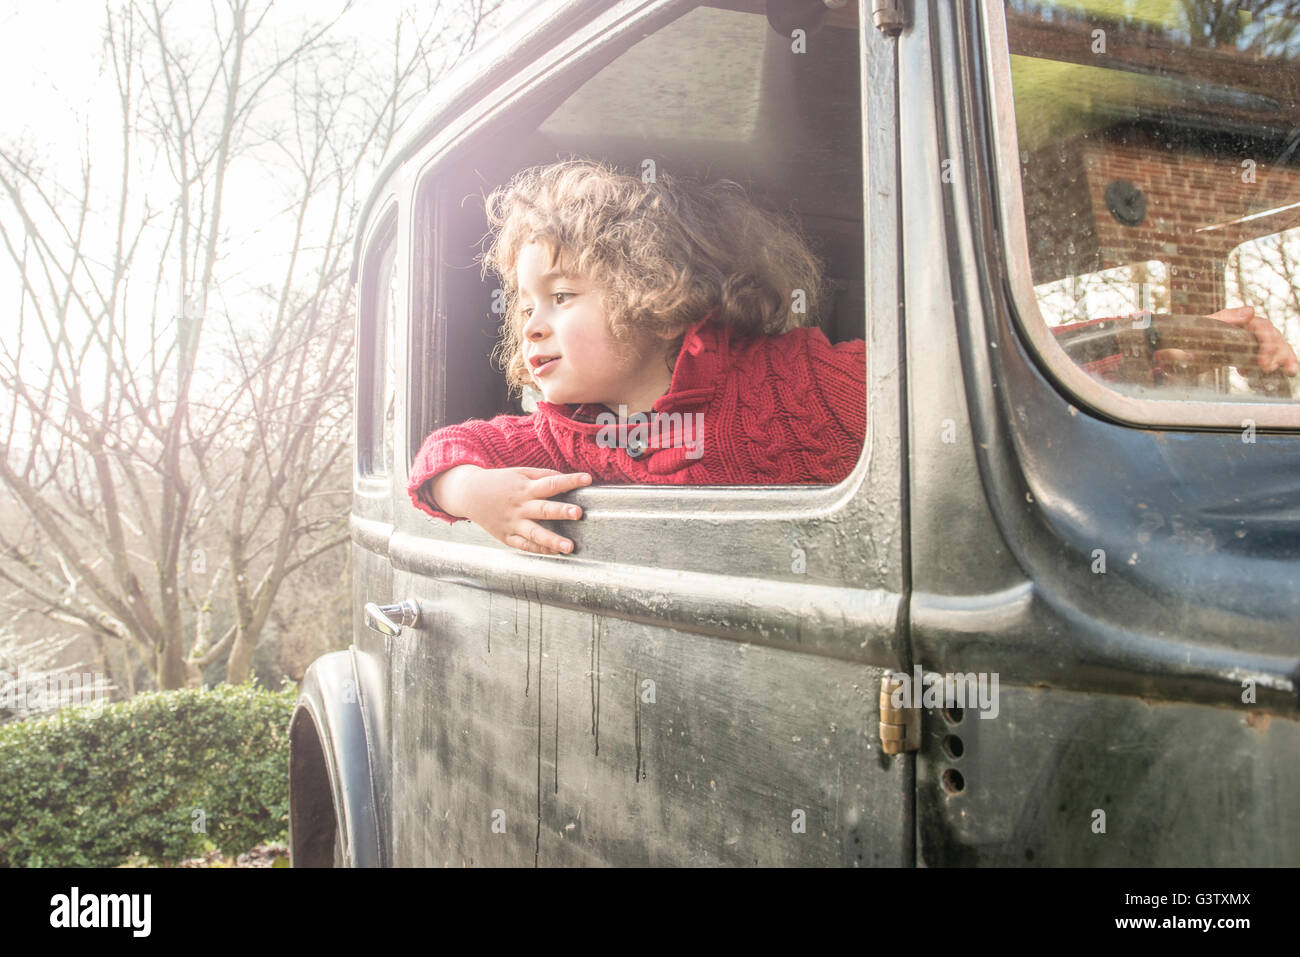 A four year old boy sitting looking out the window of a vintage car. Stock Photo